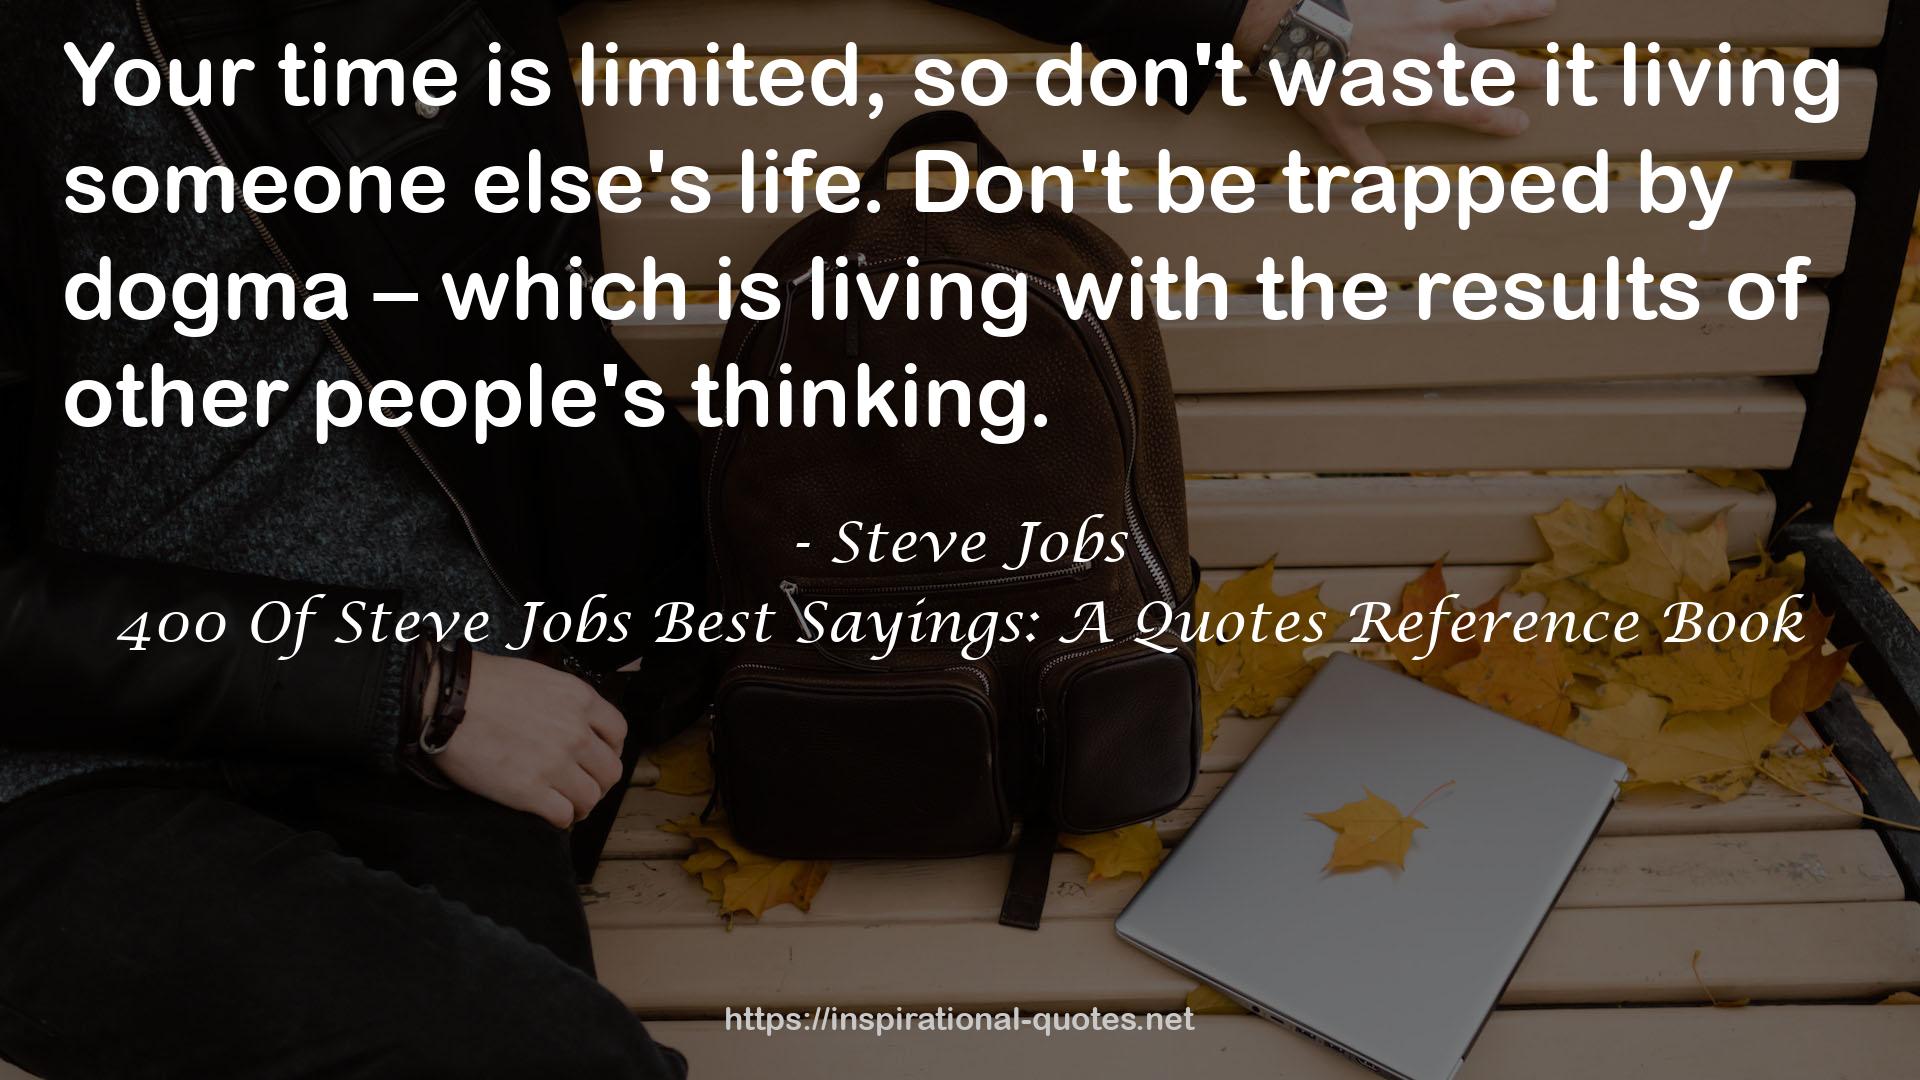 400 Of Steve Jobs Best Sayings: A Quotes Reference Book QUOTES